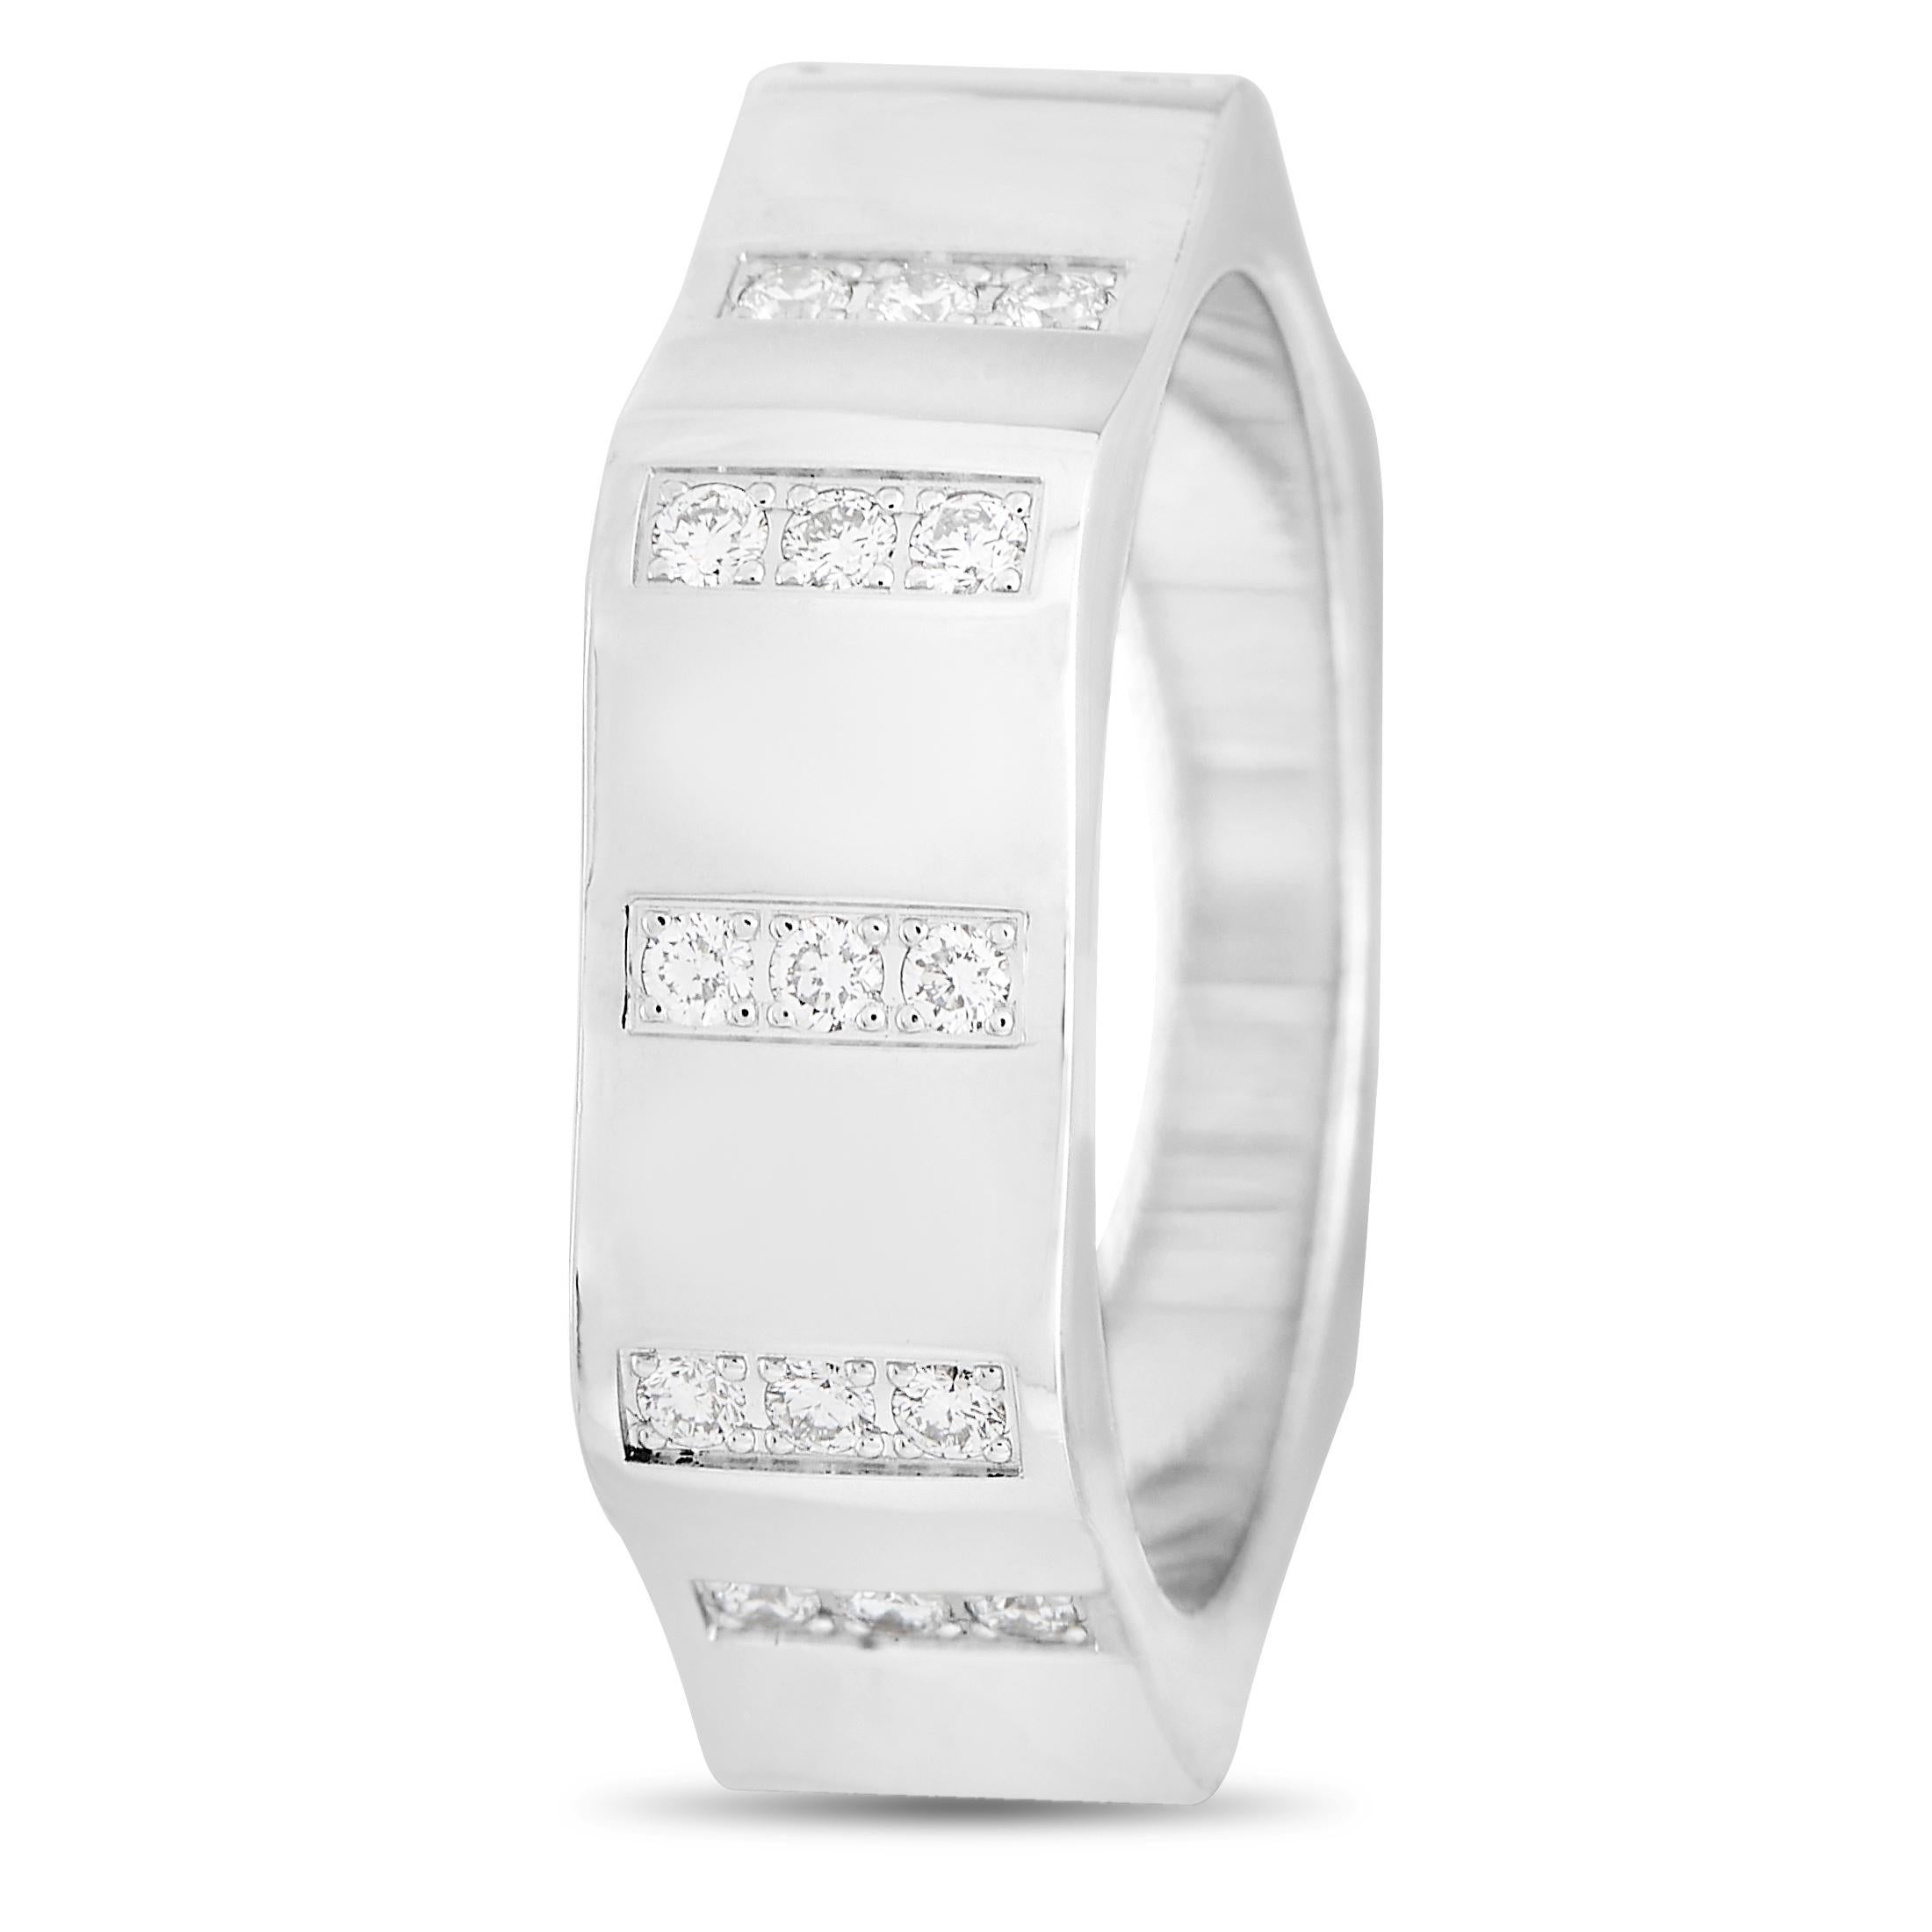 This bold design from Montblanc is incredibly impressive. Set within each peak of the 18K White Gold band, you’ll find a small series of round-cut diamonds. Decidedly elegant, this commanding band ring features a band width of 8mm and diamonds